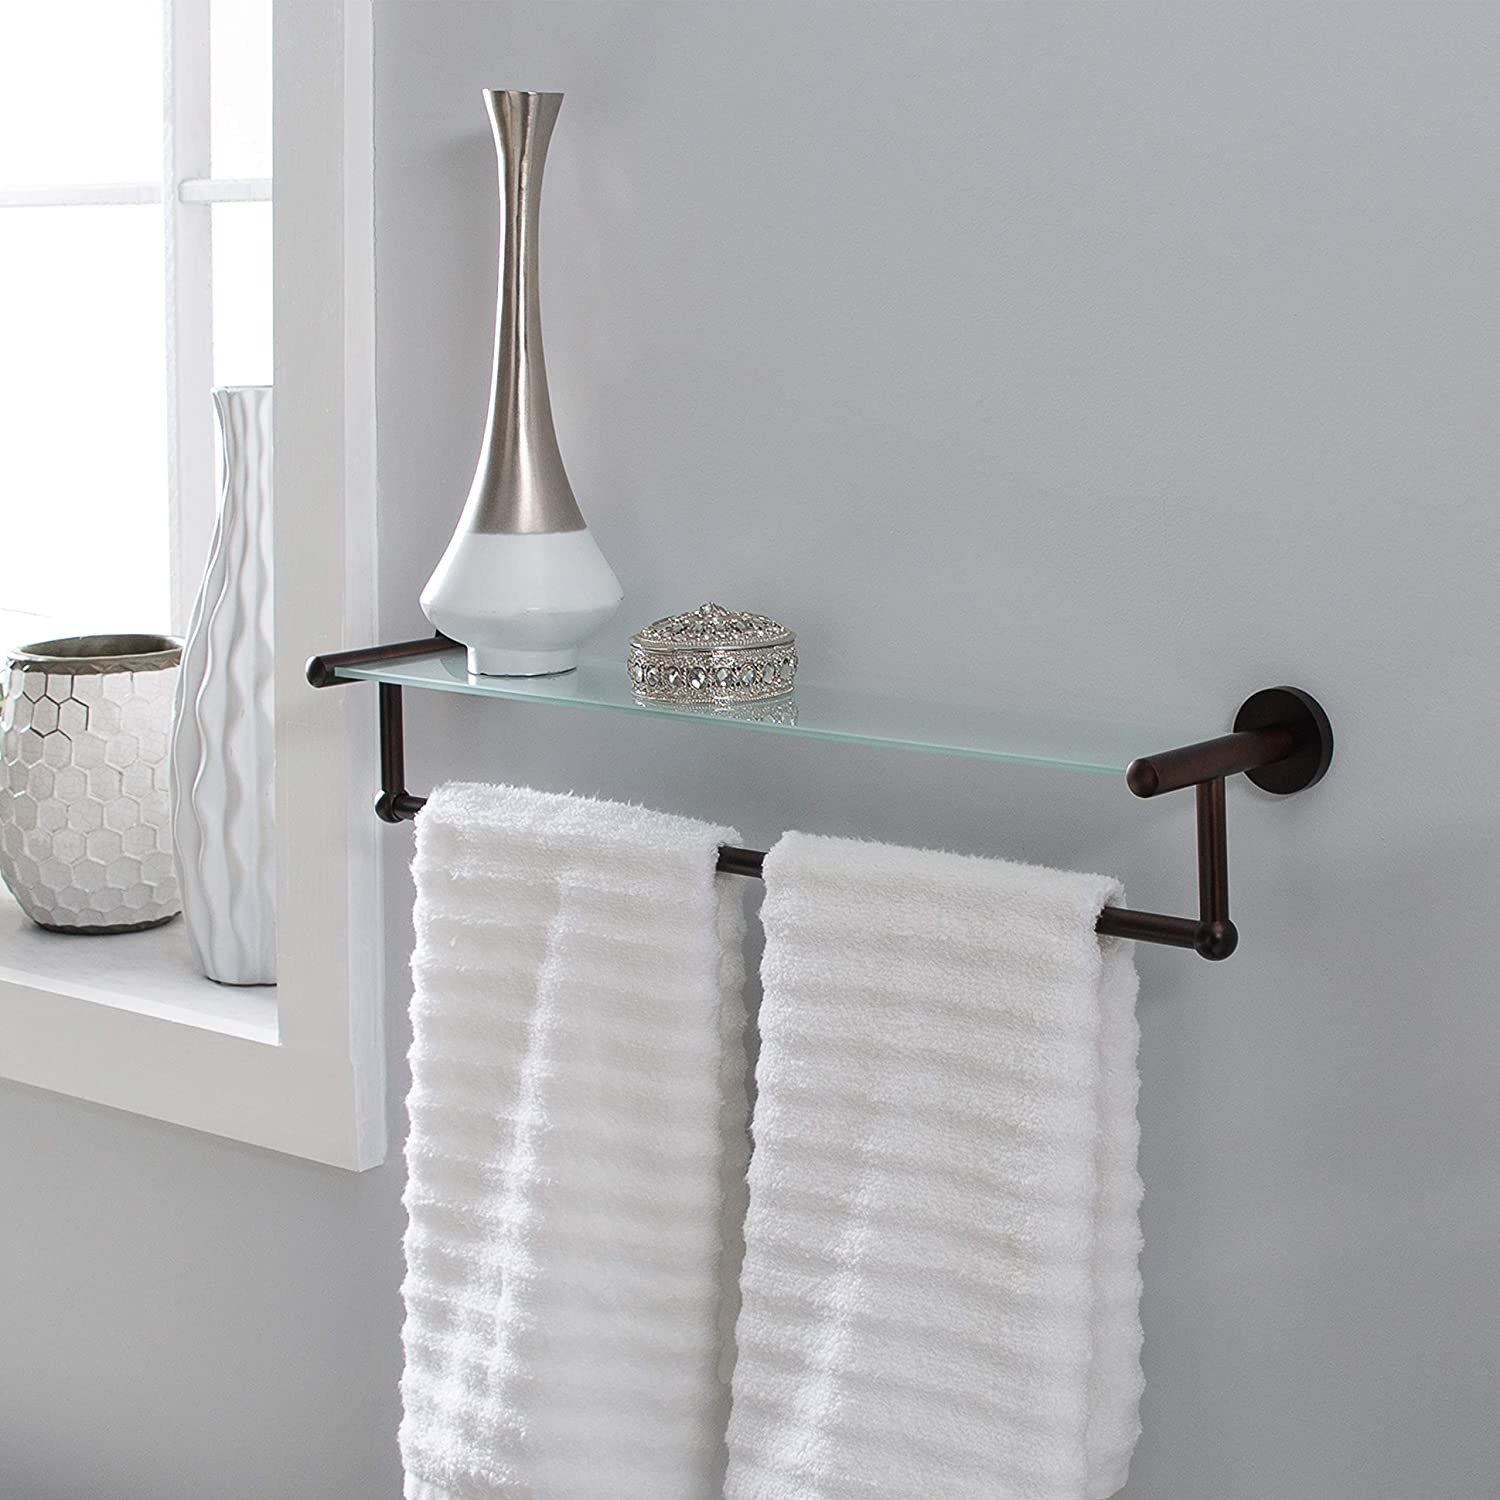 The shelf with two white towels, a vase, and a trinket displayed on it